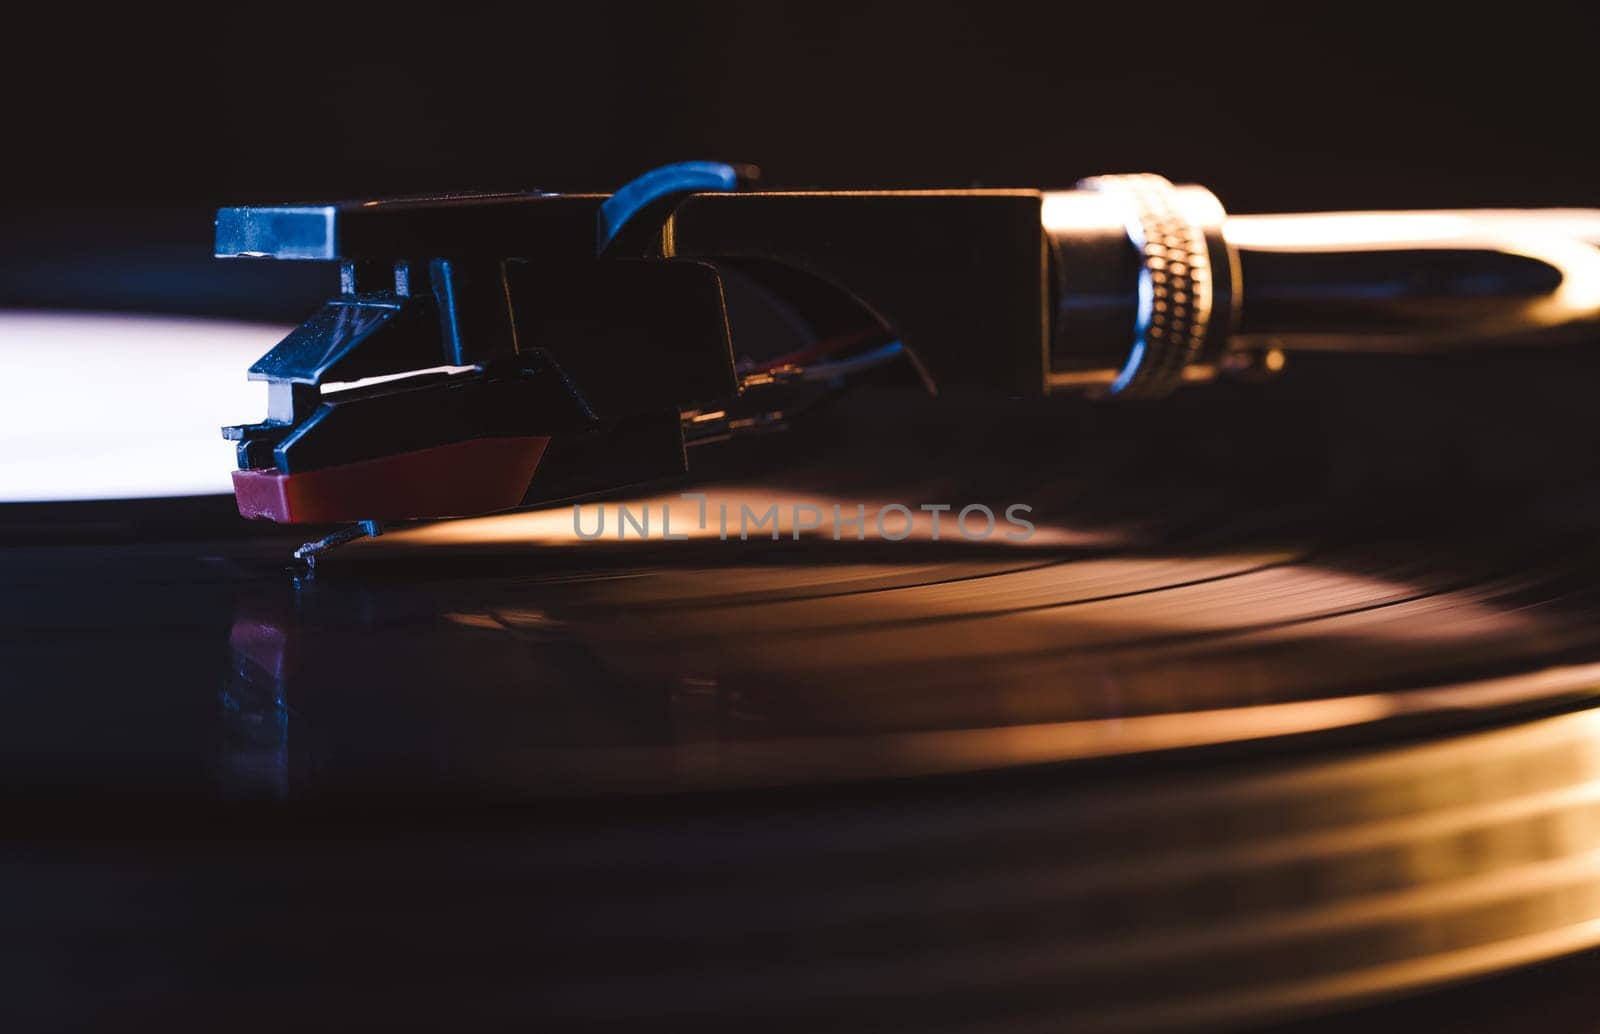 Classic vinyl record, turntable spin, analog sound, music concept. Celebrating retro vibes, vintage aesthetics. Macro dynamic motion. Iconic imagery. High quality